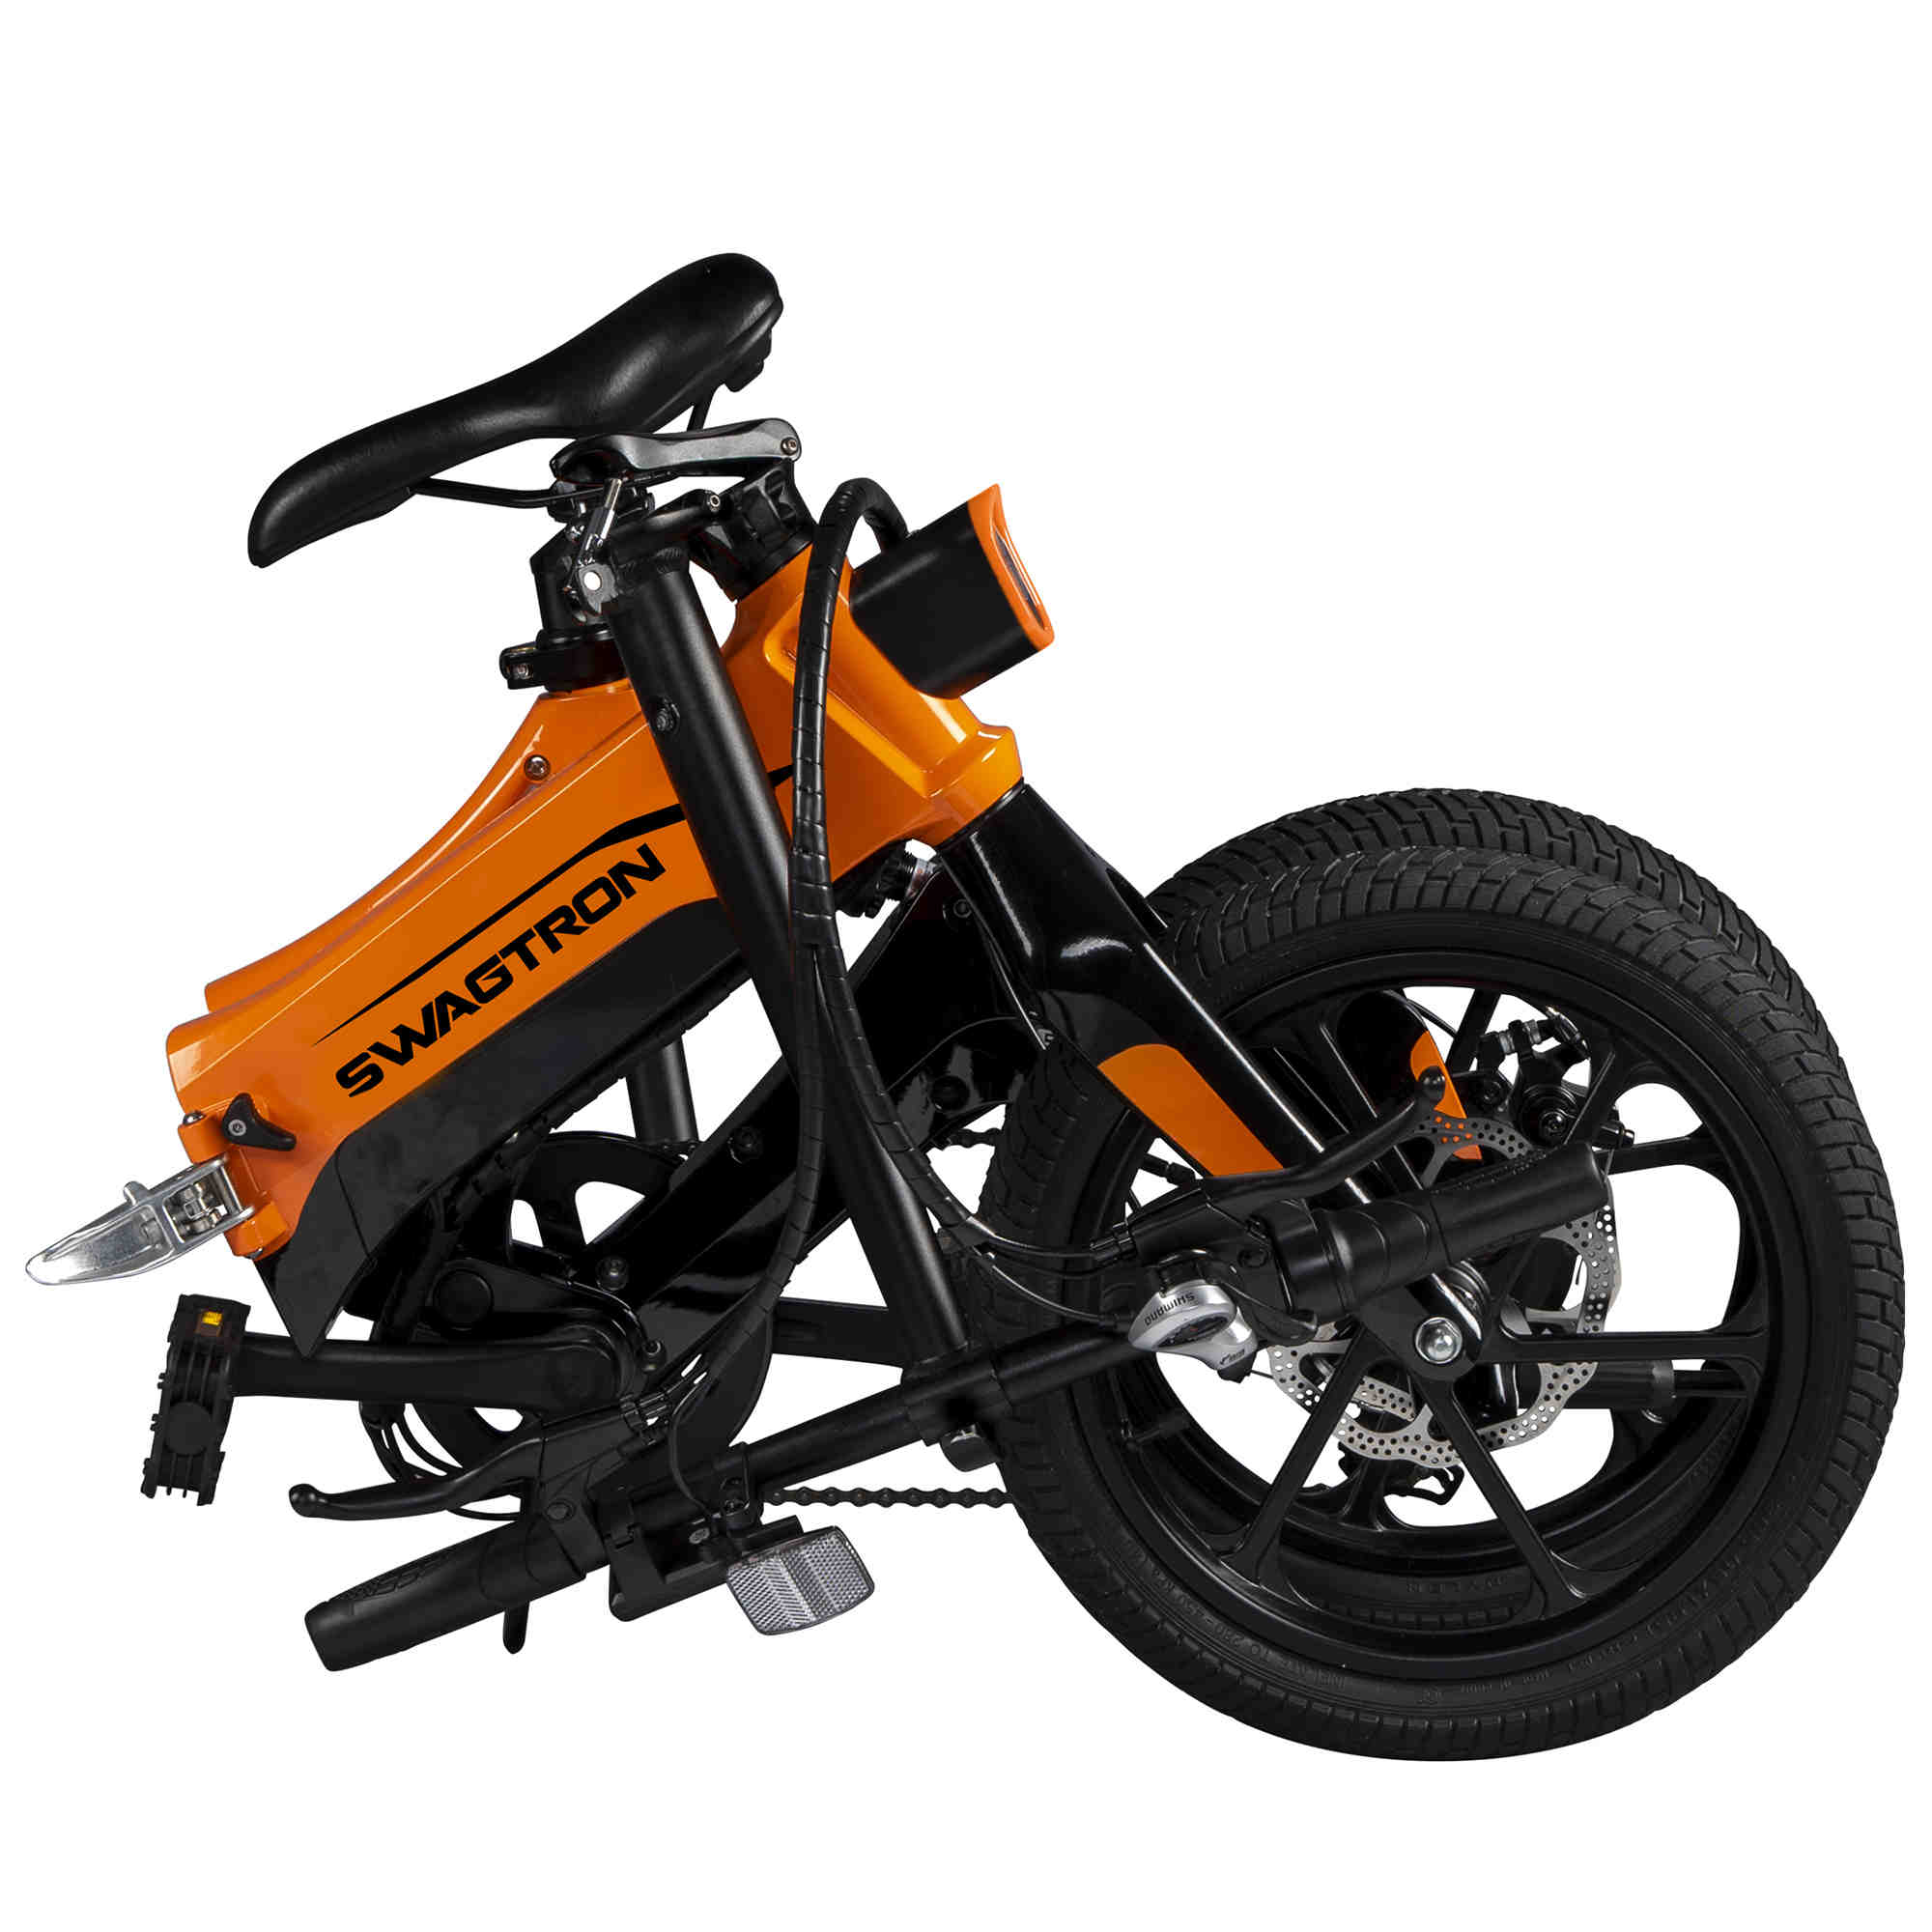 What is the best folding electric bike on the market?